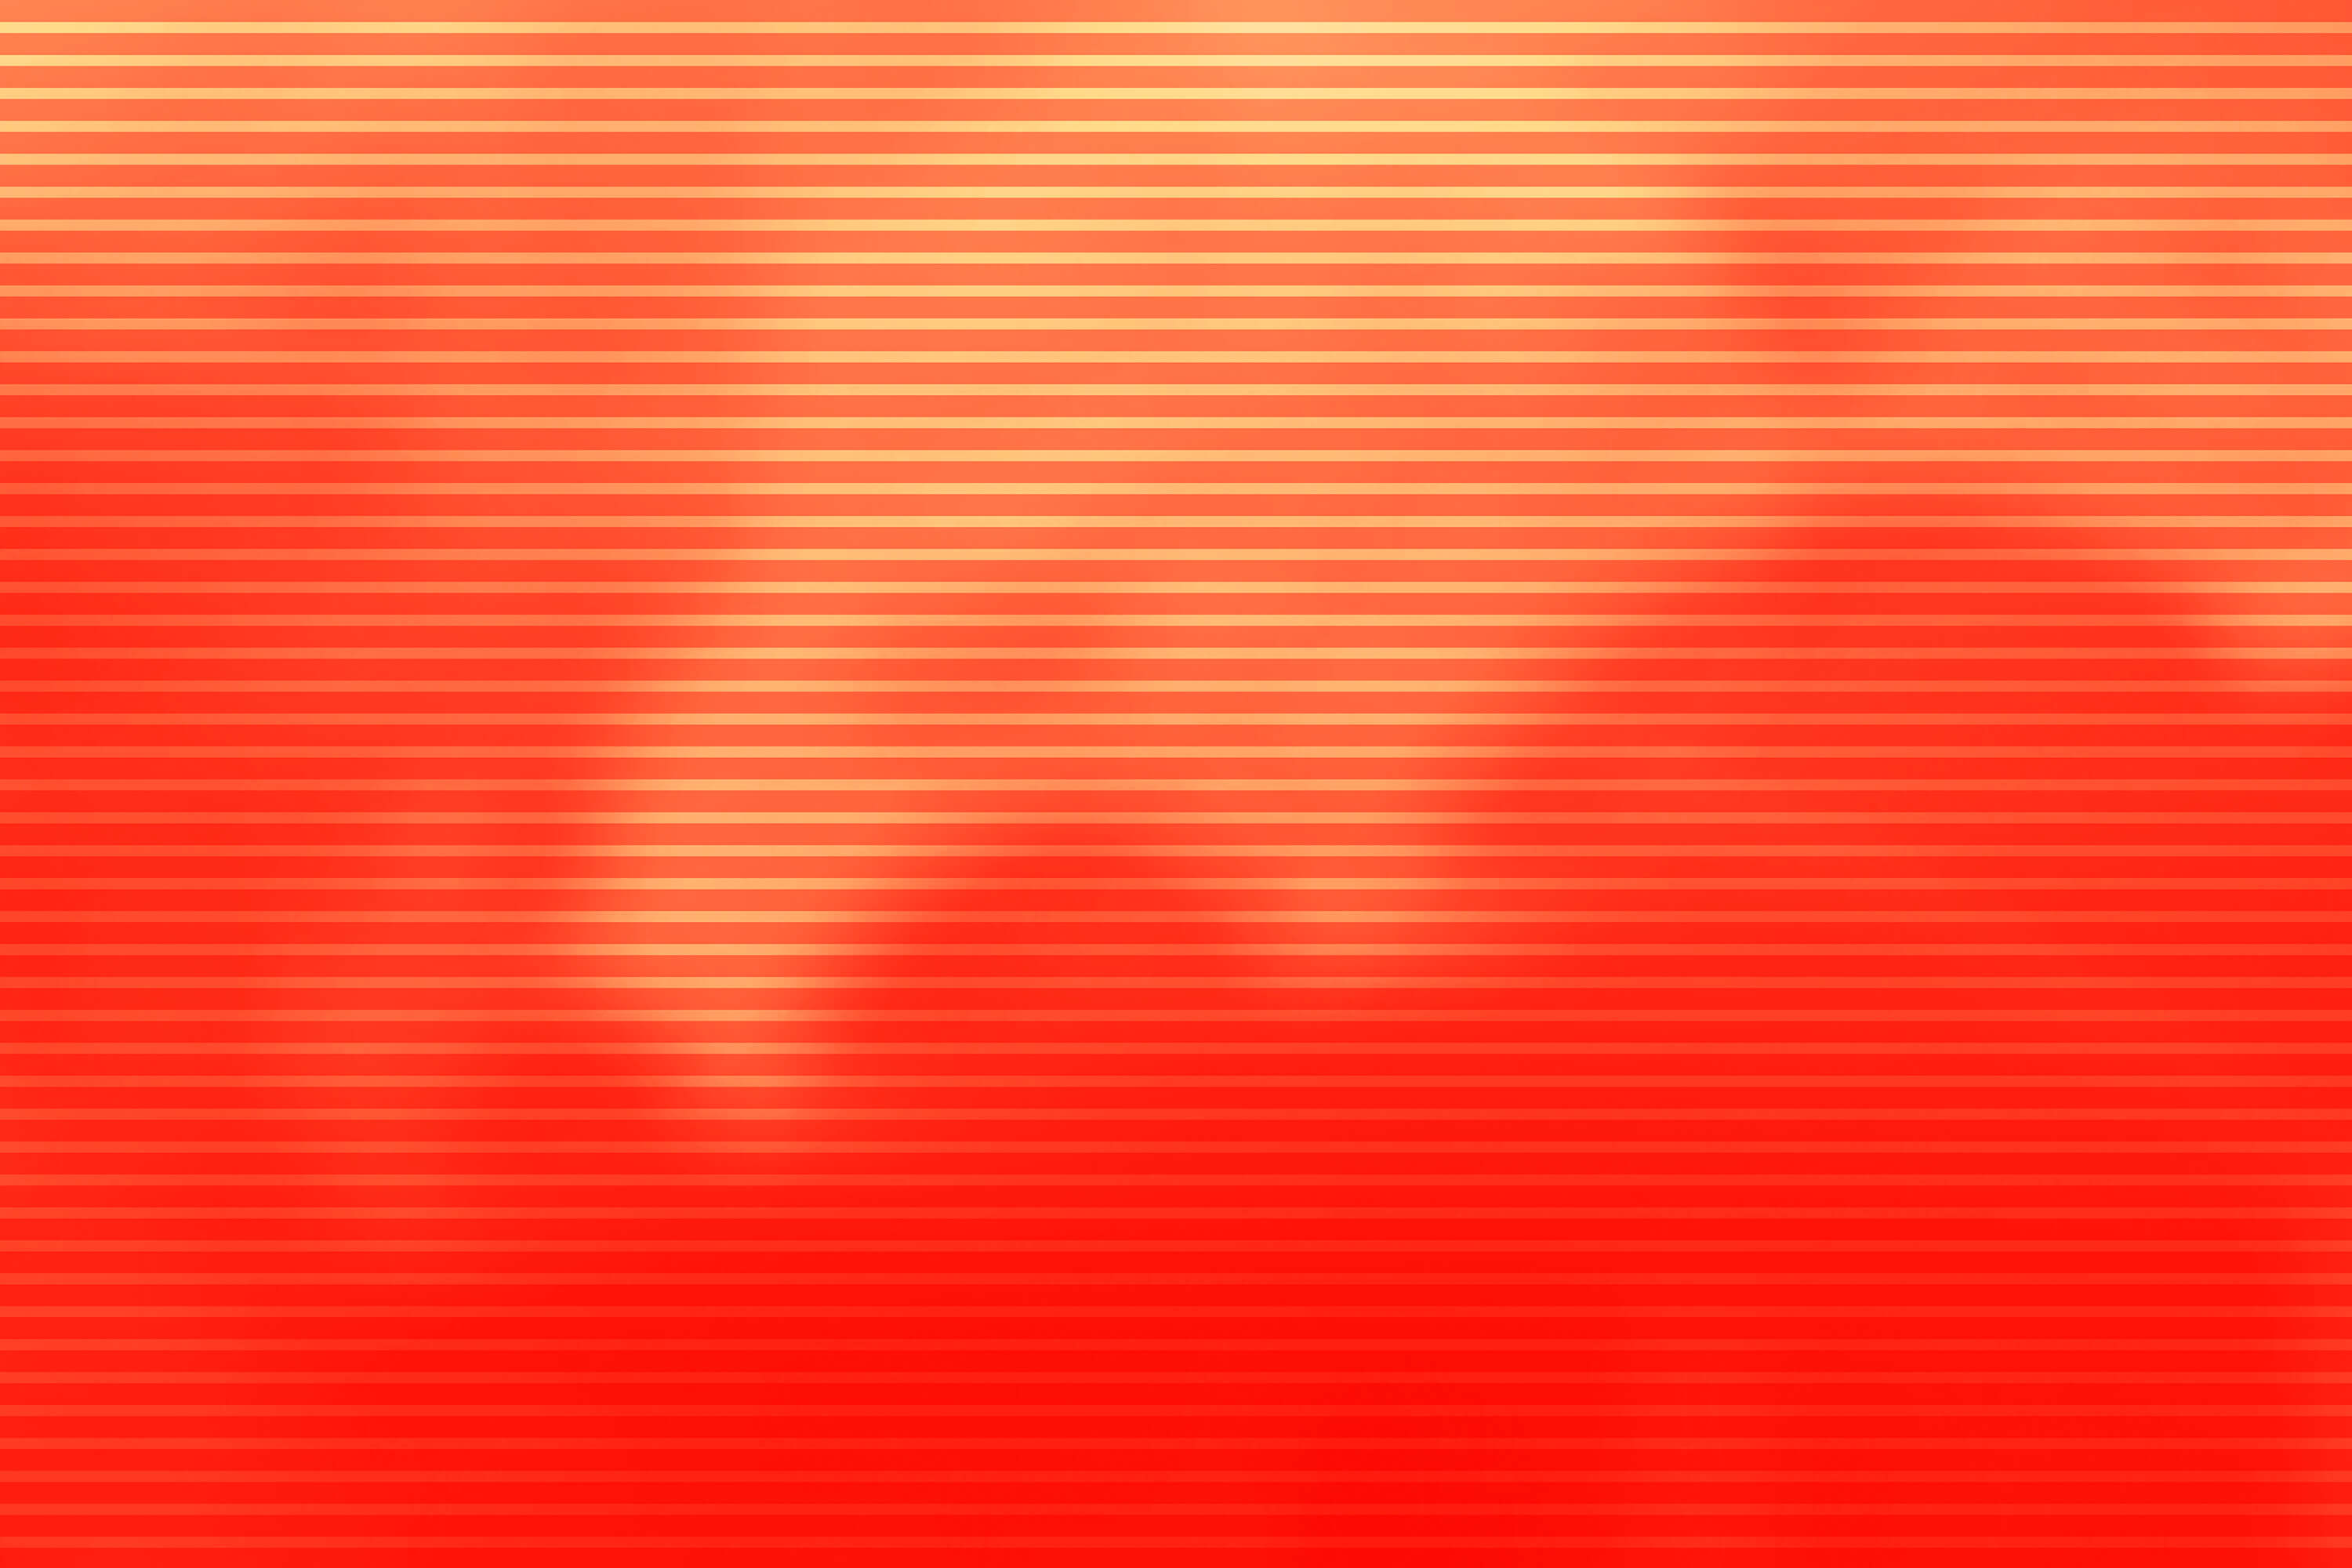 An orange colour field shows slight abstract contours.